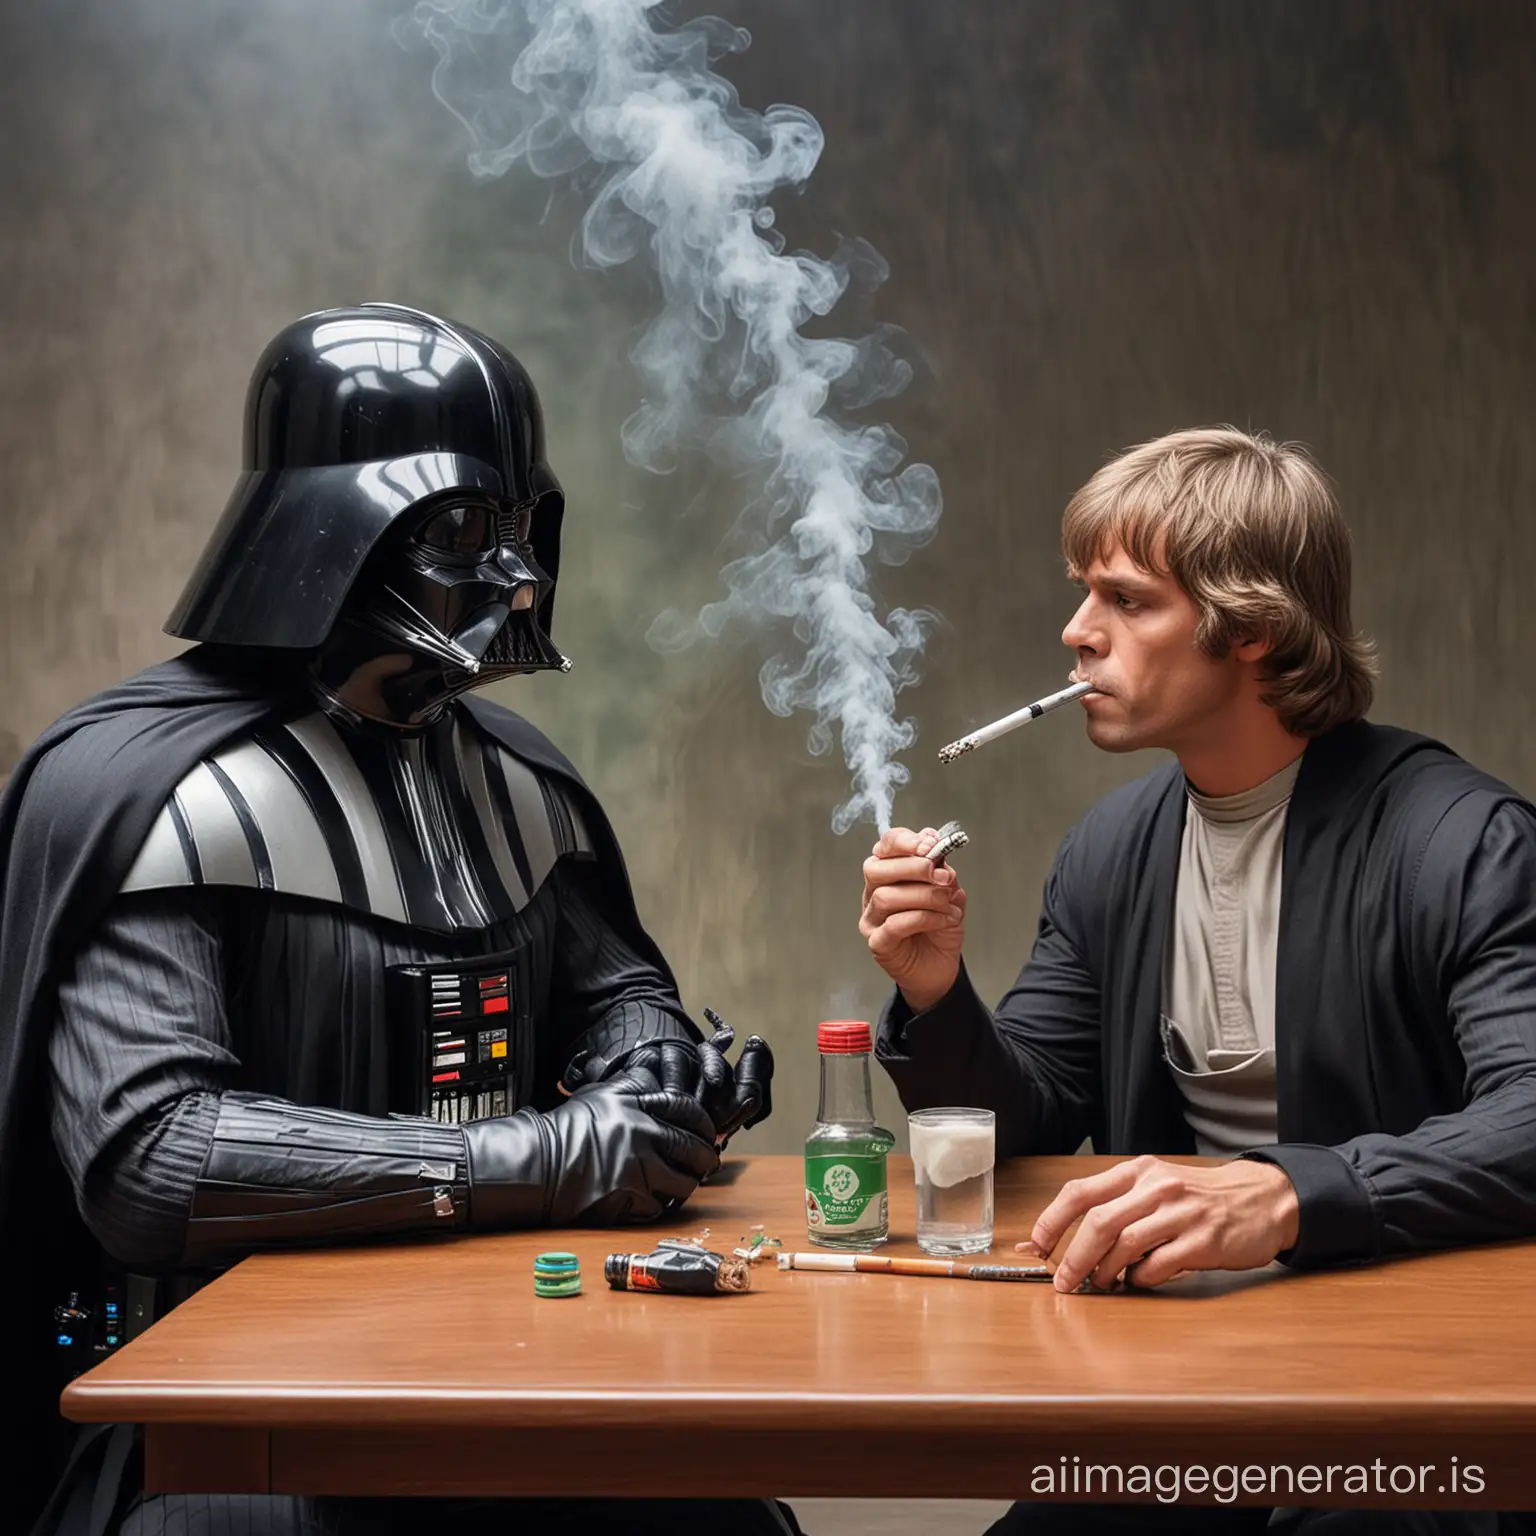 Darth Vader with Luke Skywalker smoking weed from bong and drugs on table